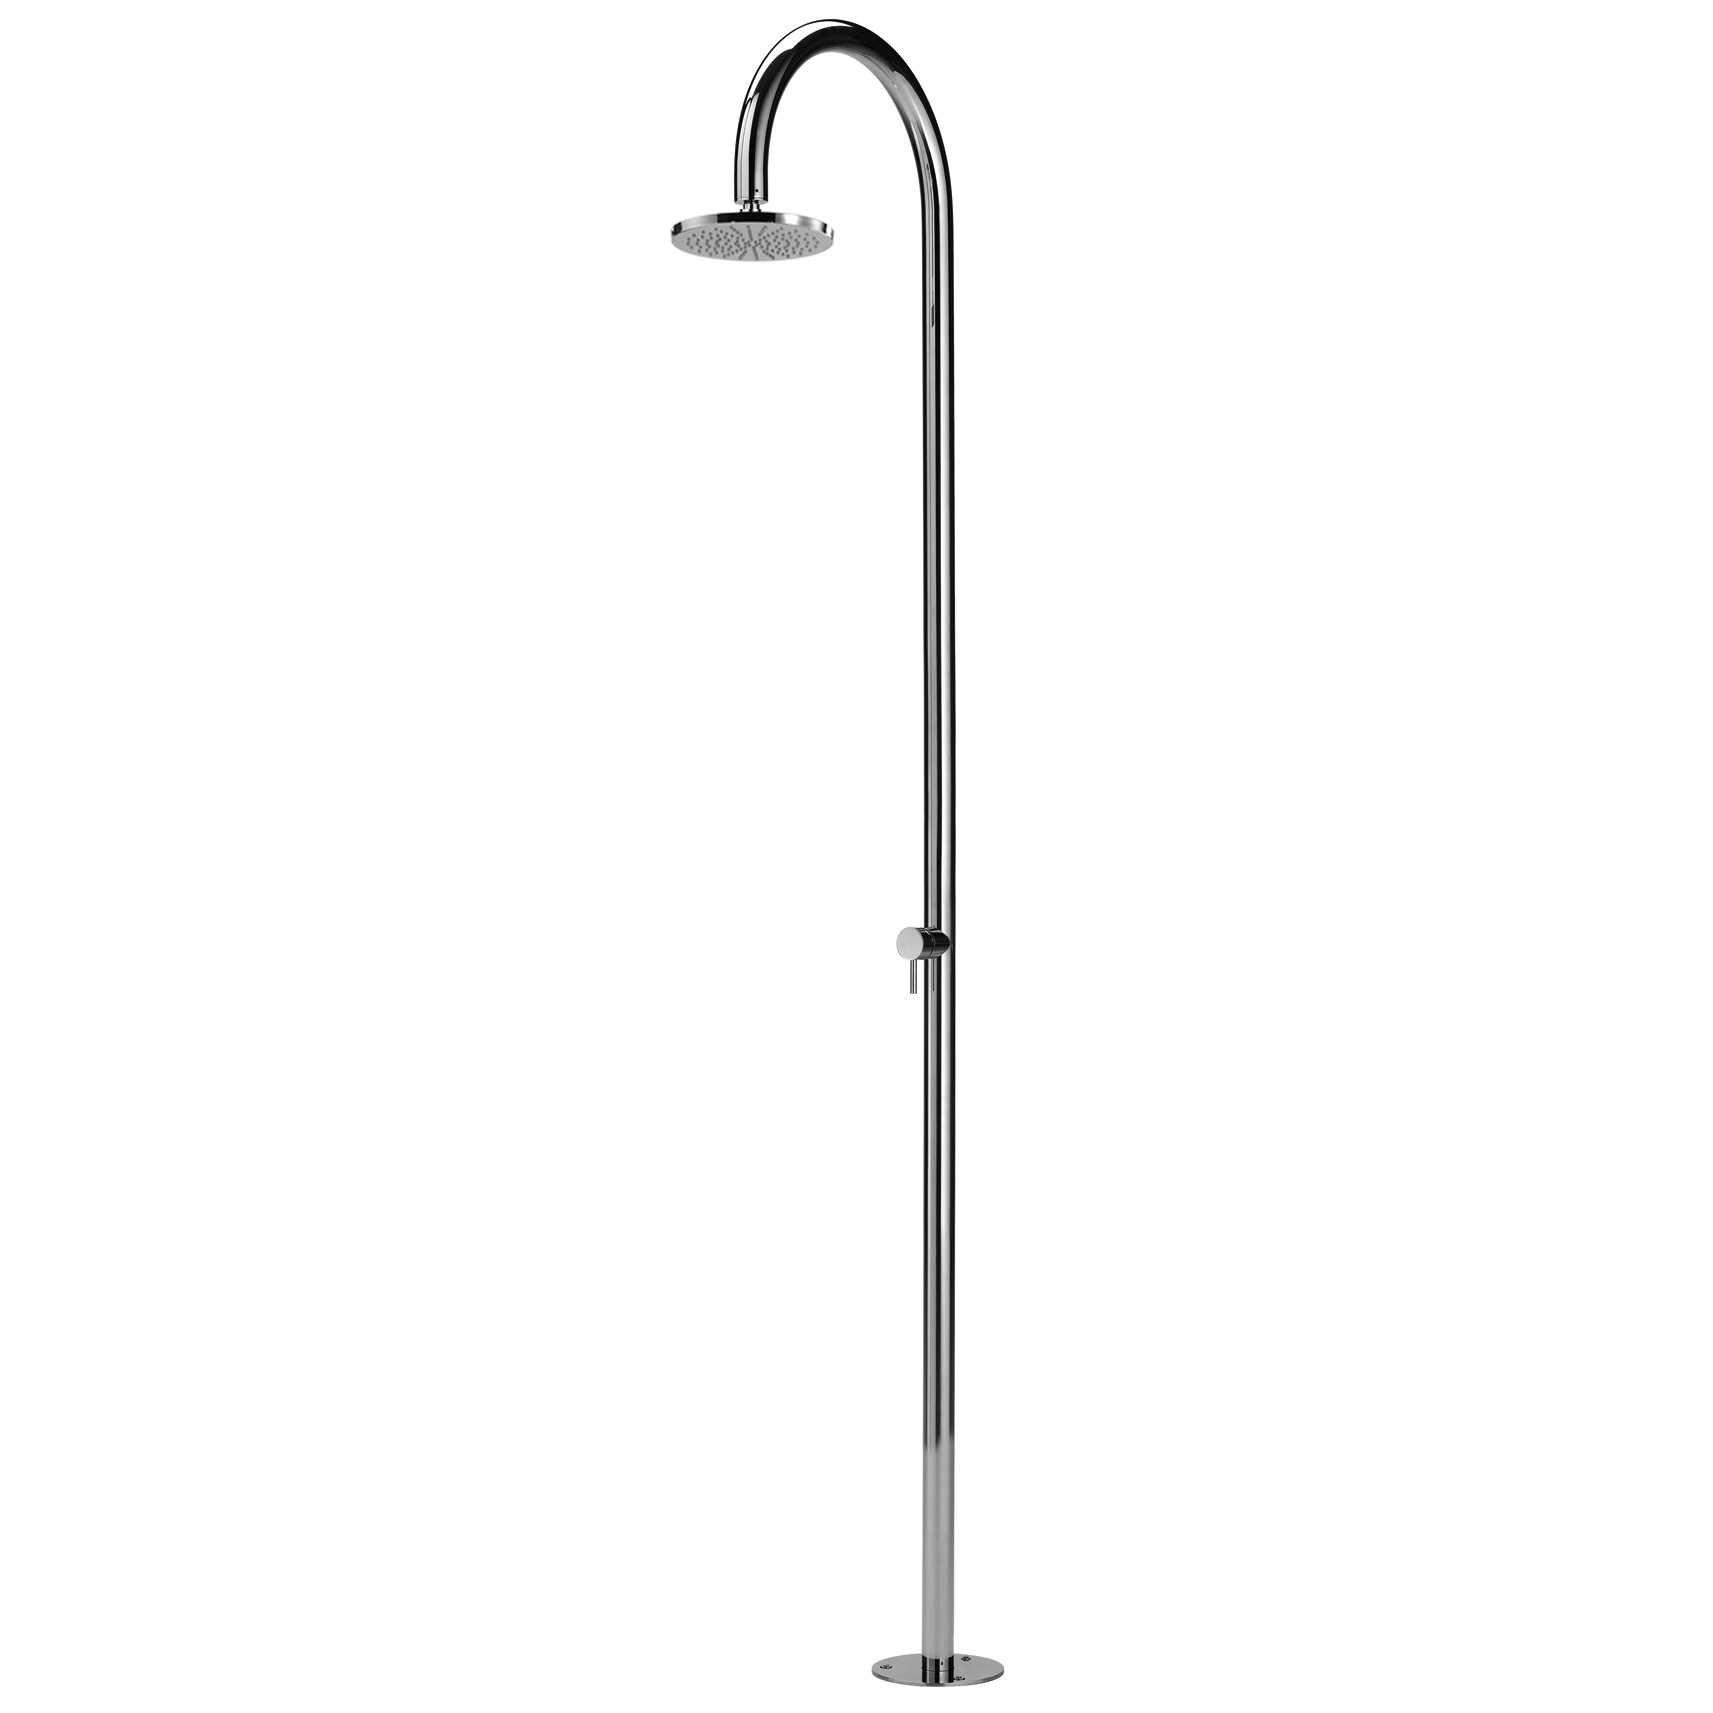 Origo C50 316 Marine Grade Stainless Steel Free Standing Hot and Cold Shower Column with 8" Shower Head